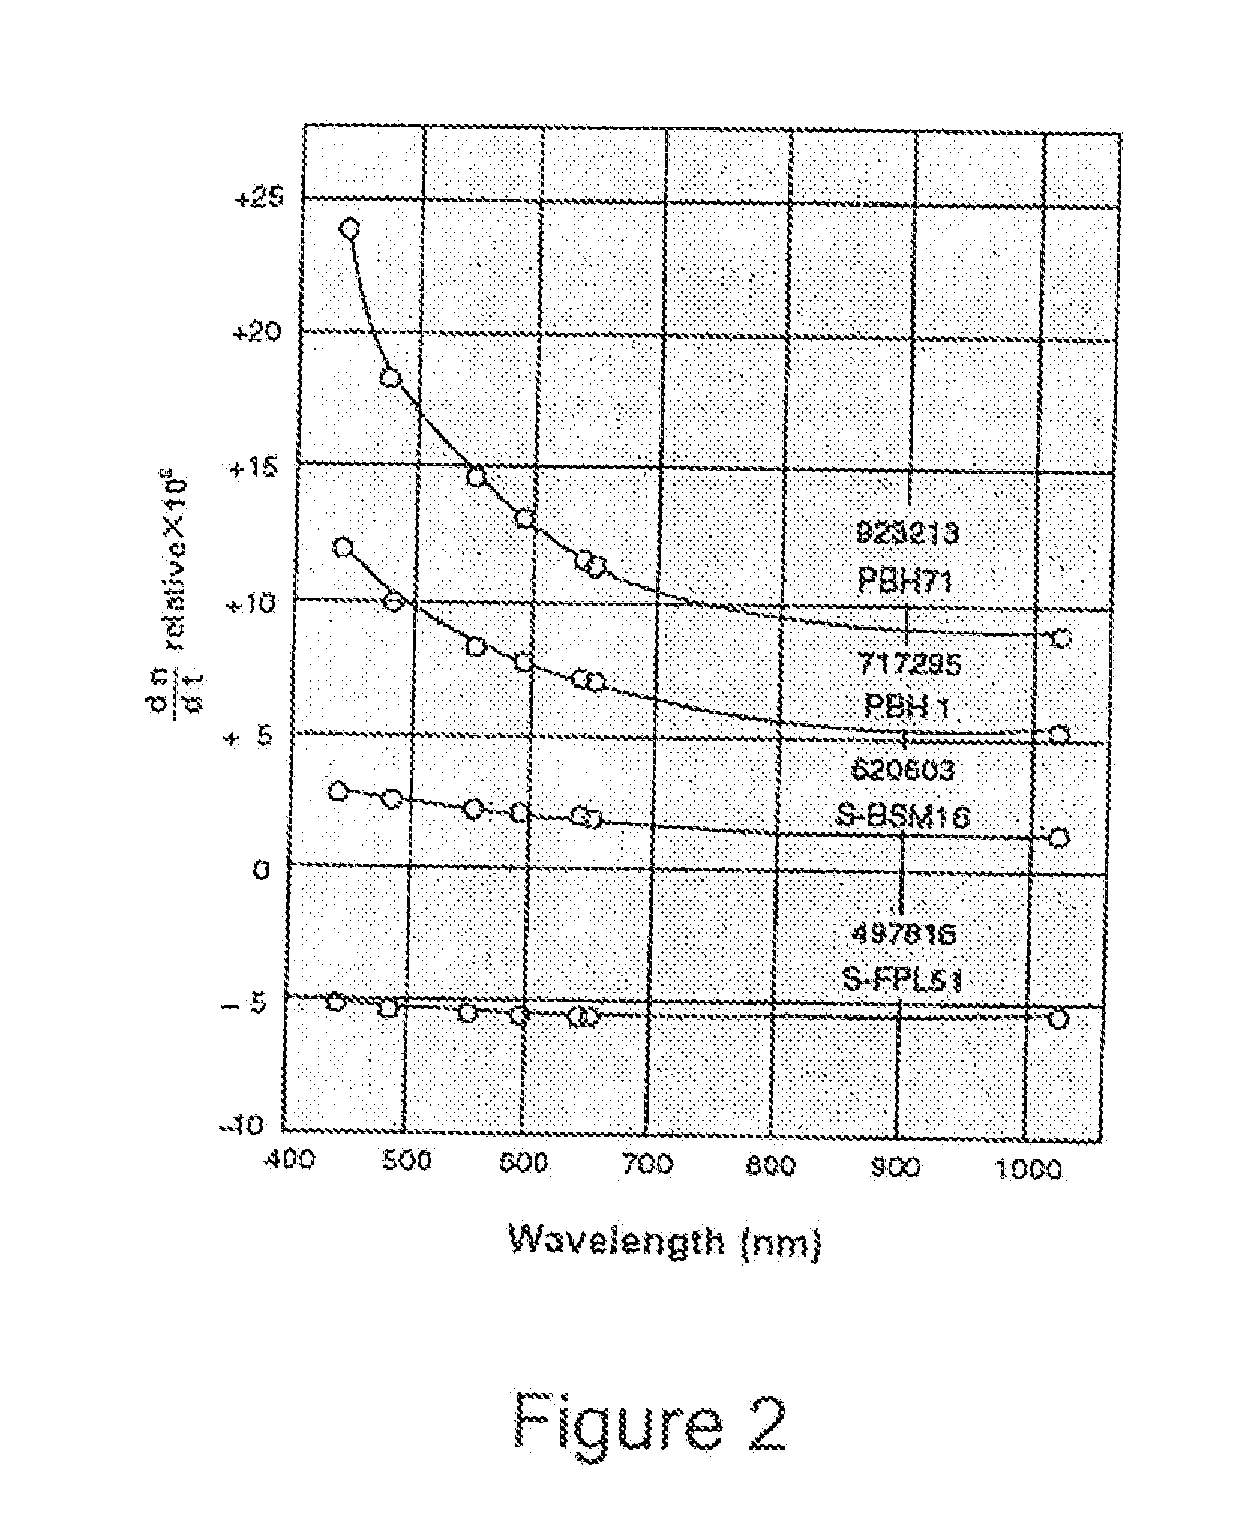 Wide field athermalized orthoscopic lens system